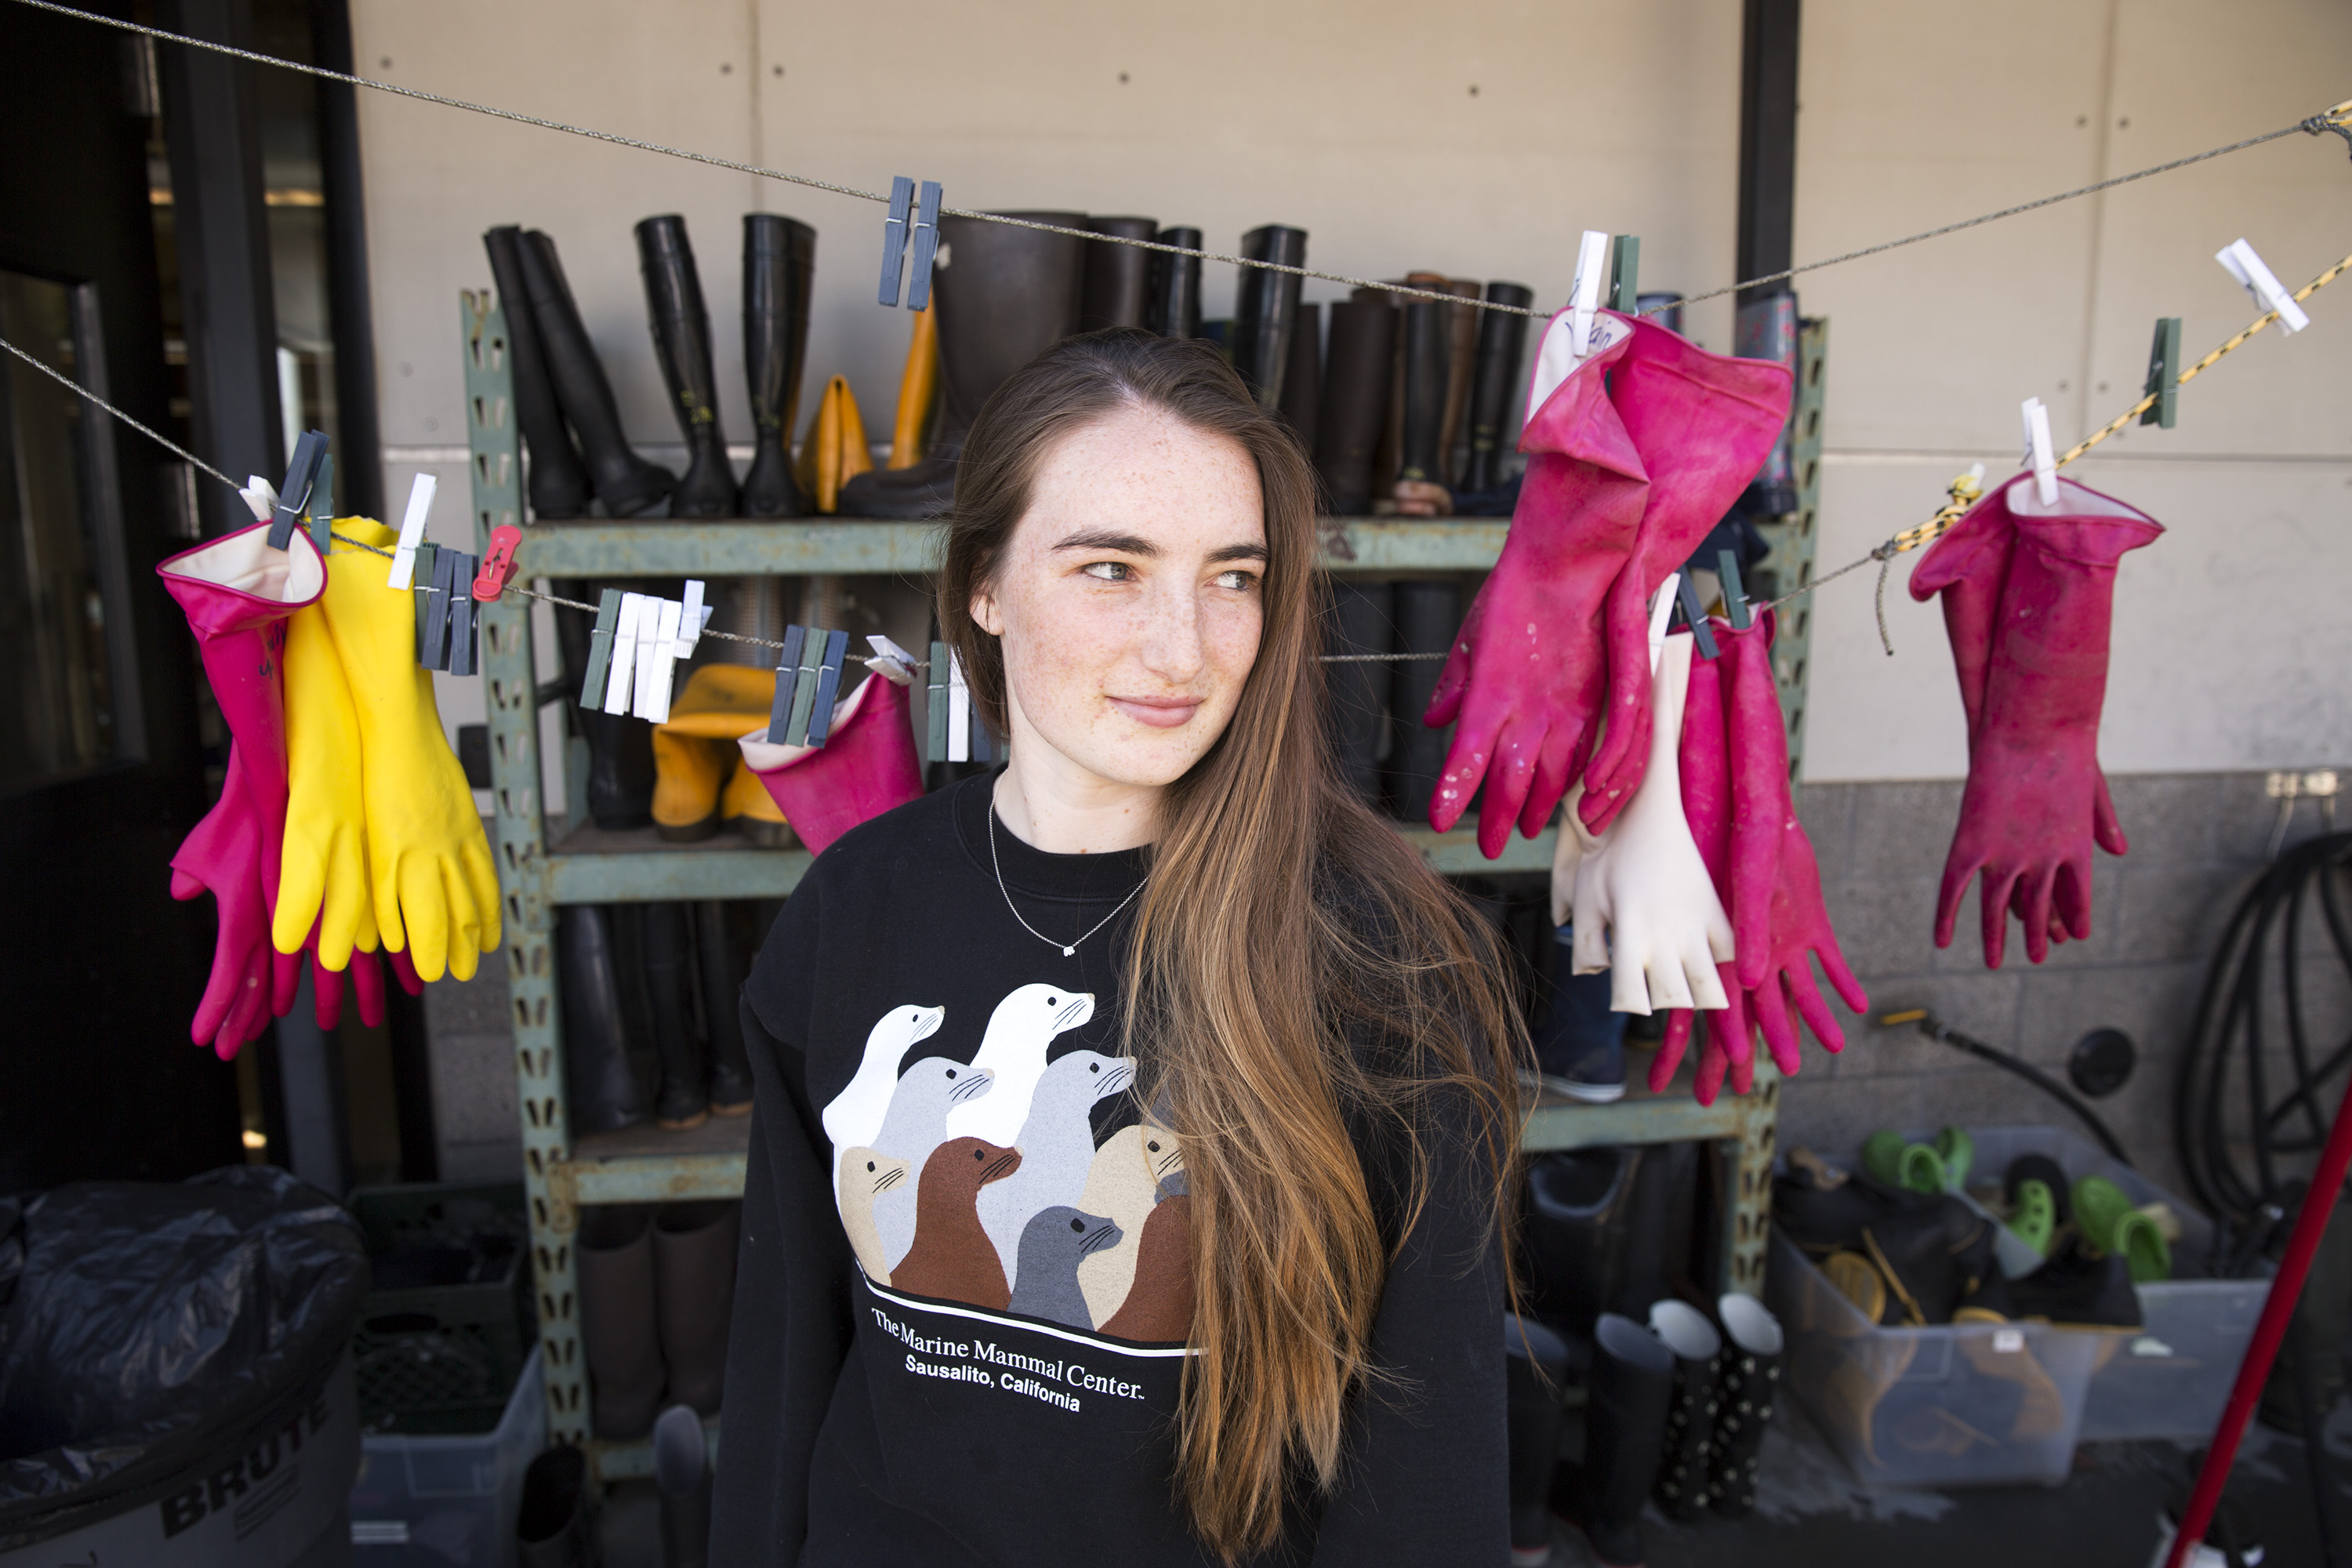 Siobhan Rickert, 18, has been a volunteer at the Marine Mammal Center for four years  She is one of a dedicated network of 1,100 volunteers who help run the facility in Marin County, Calif., May 9, 2014.